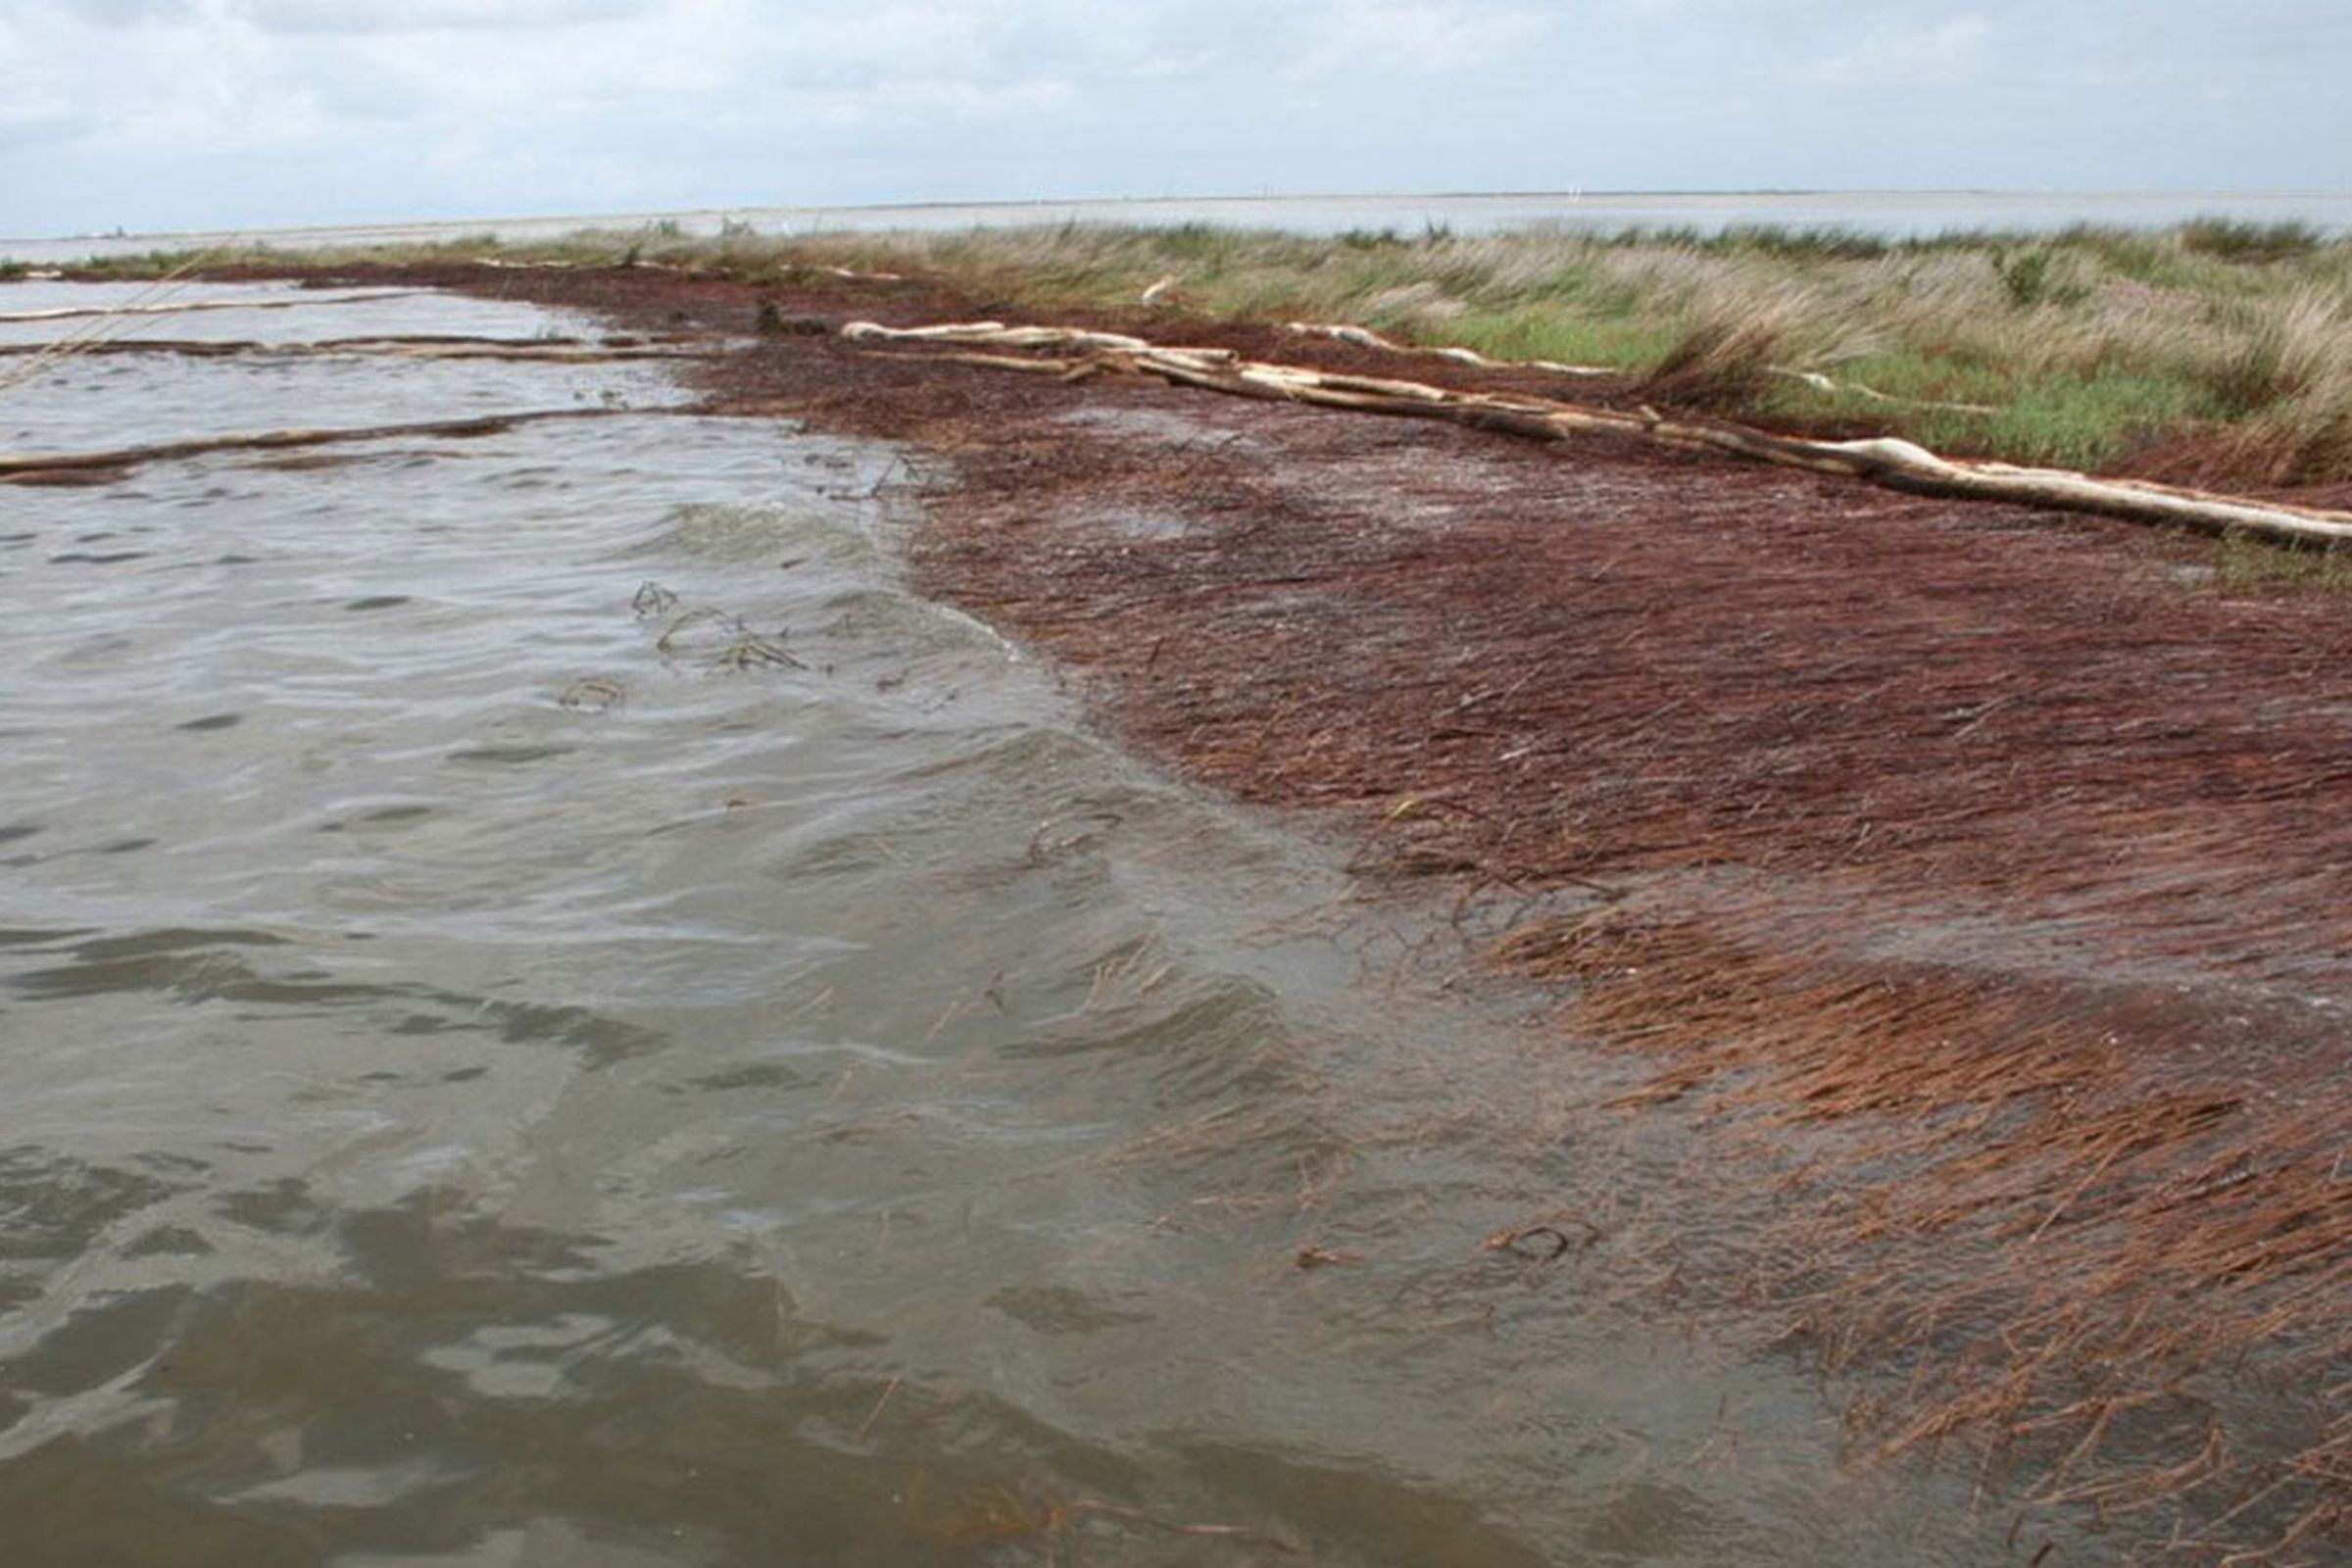 Oil on the shores of Bay Jimmy, Plaquemines Parish, Louisiana, in 2010.